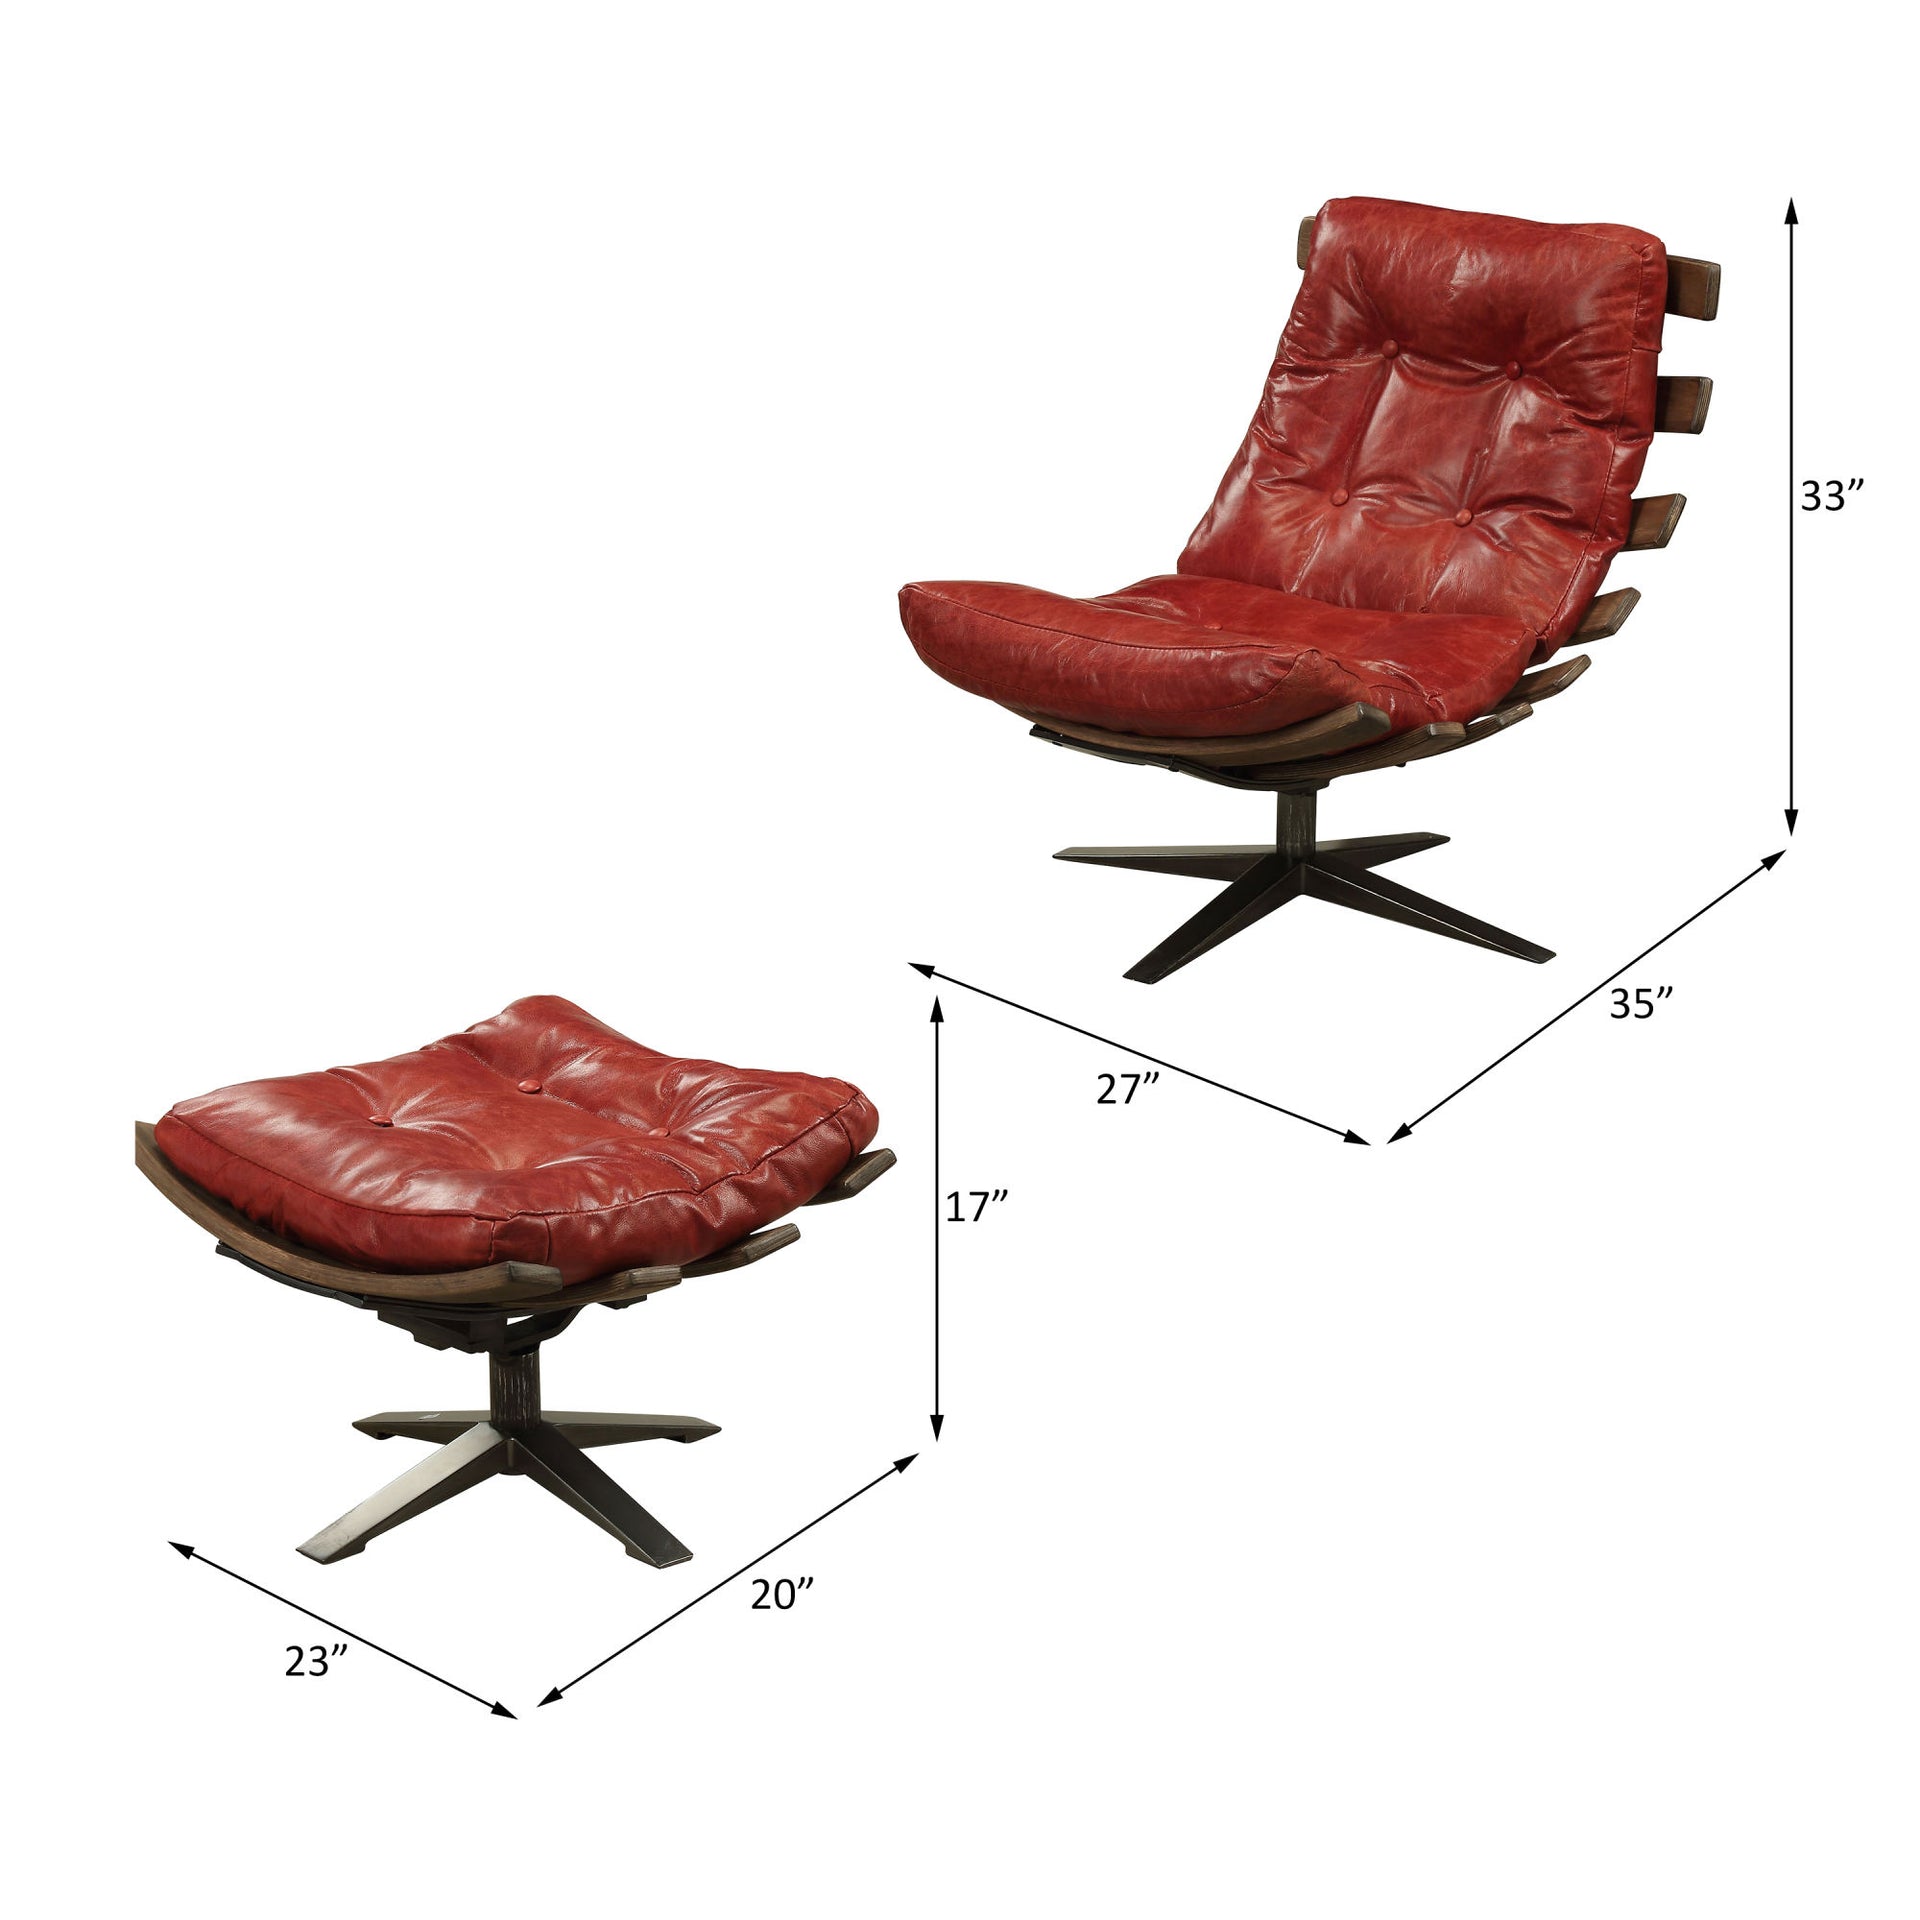 ACME Gandy Chair & Ottoman (2Pc Pk) in Antique Red Top Grain Leather 59531